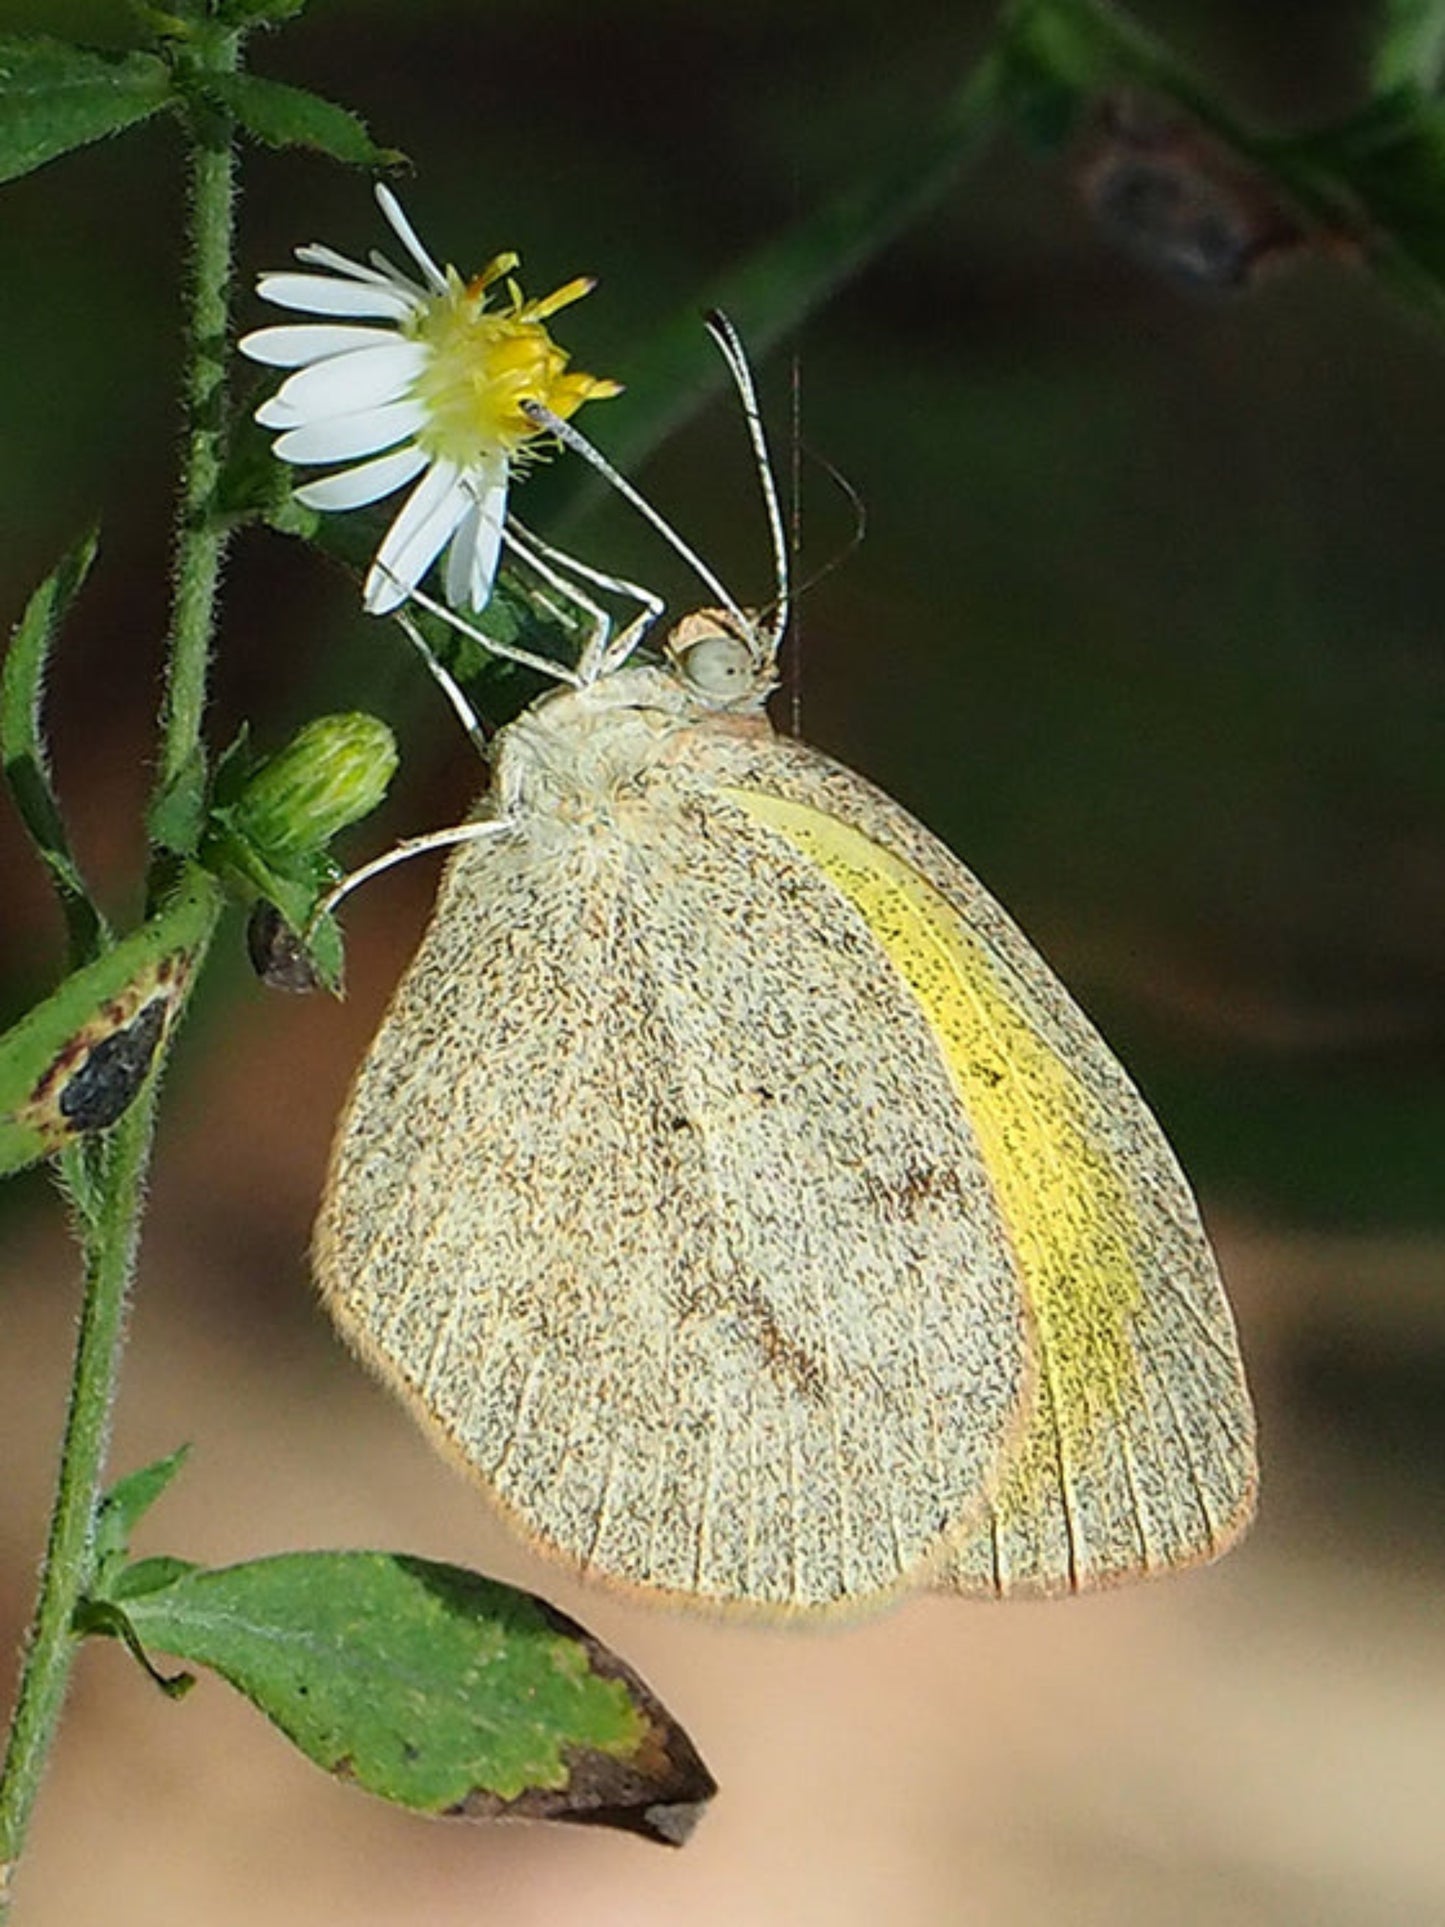 barred yellow butterfly uses pencil flower as a host plant